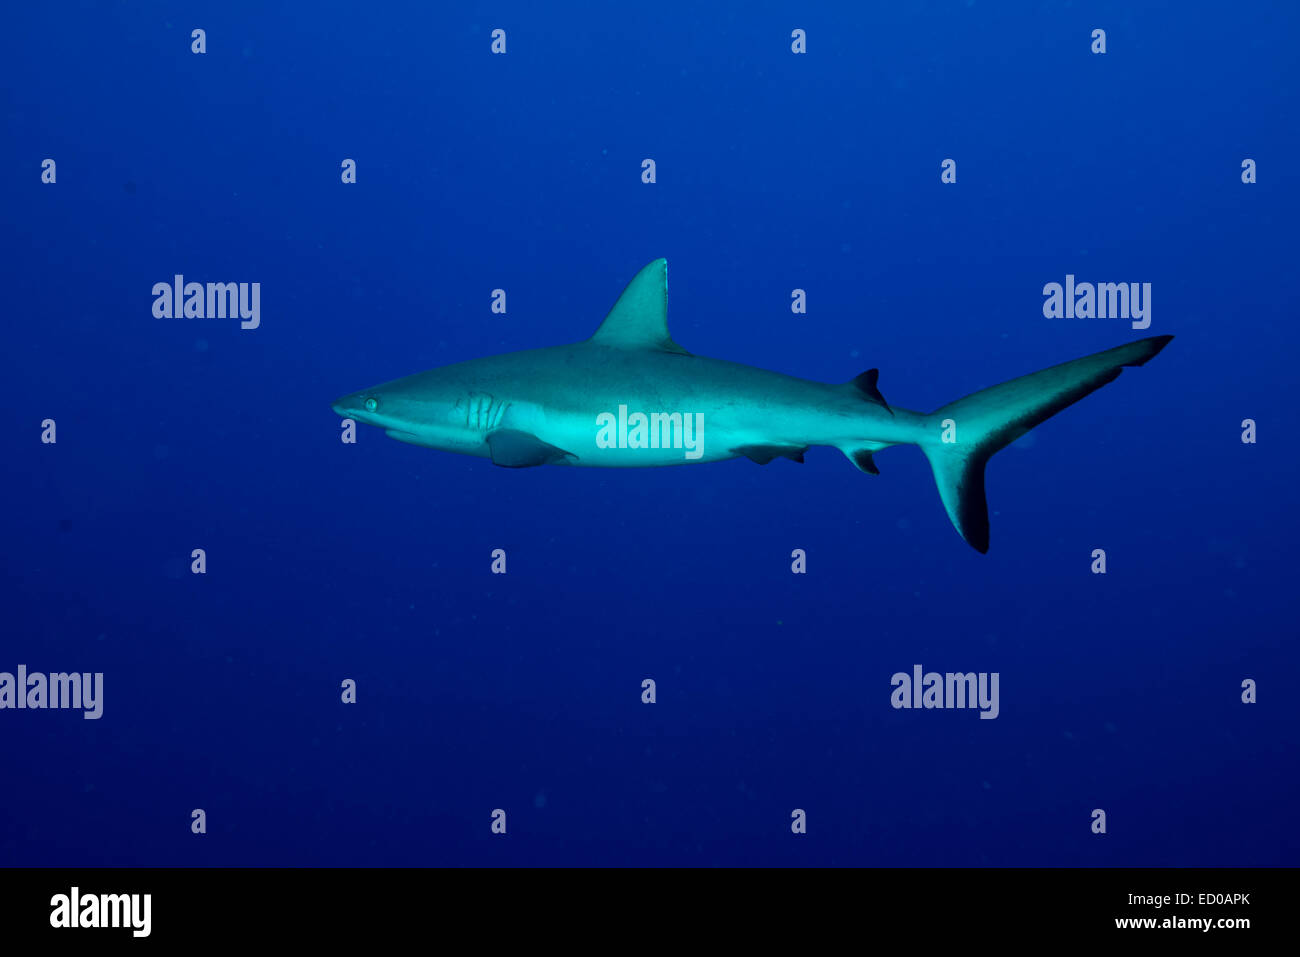 The Grey reef shark vanished into the deep blue. at Yap island, Federated States of Micronesia. Stock Photo